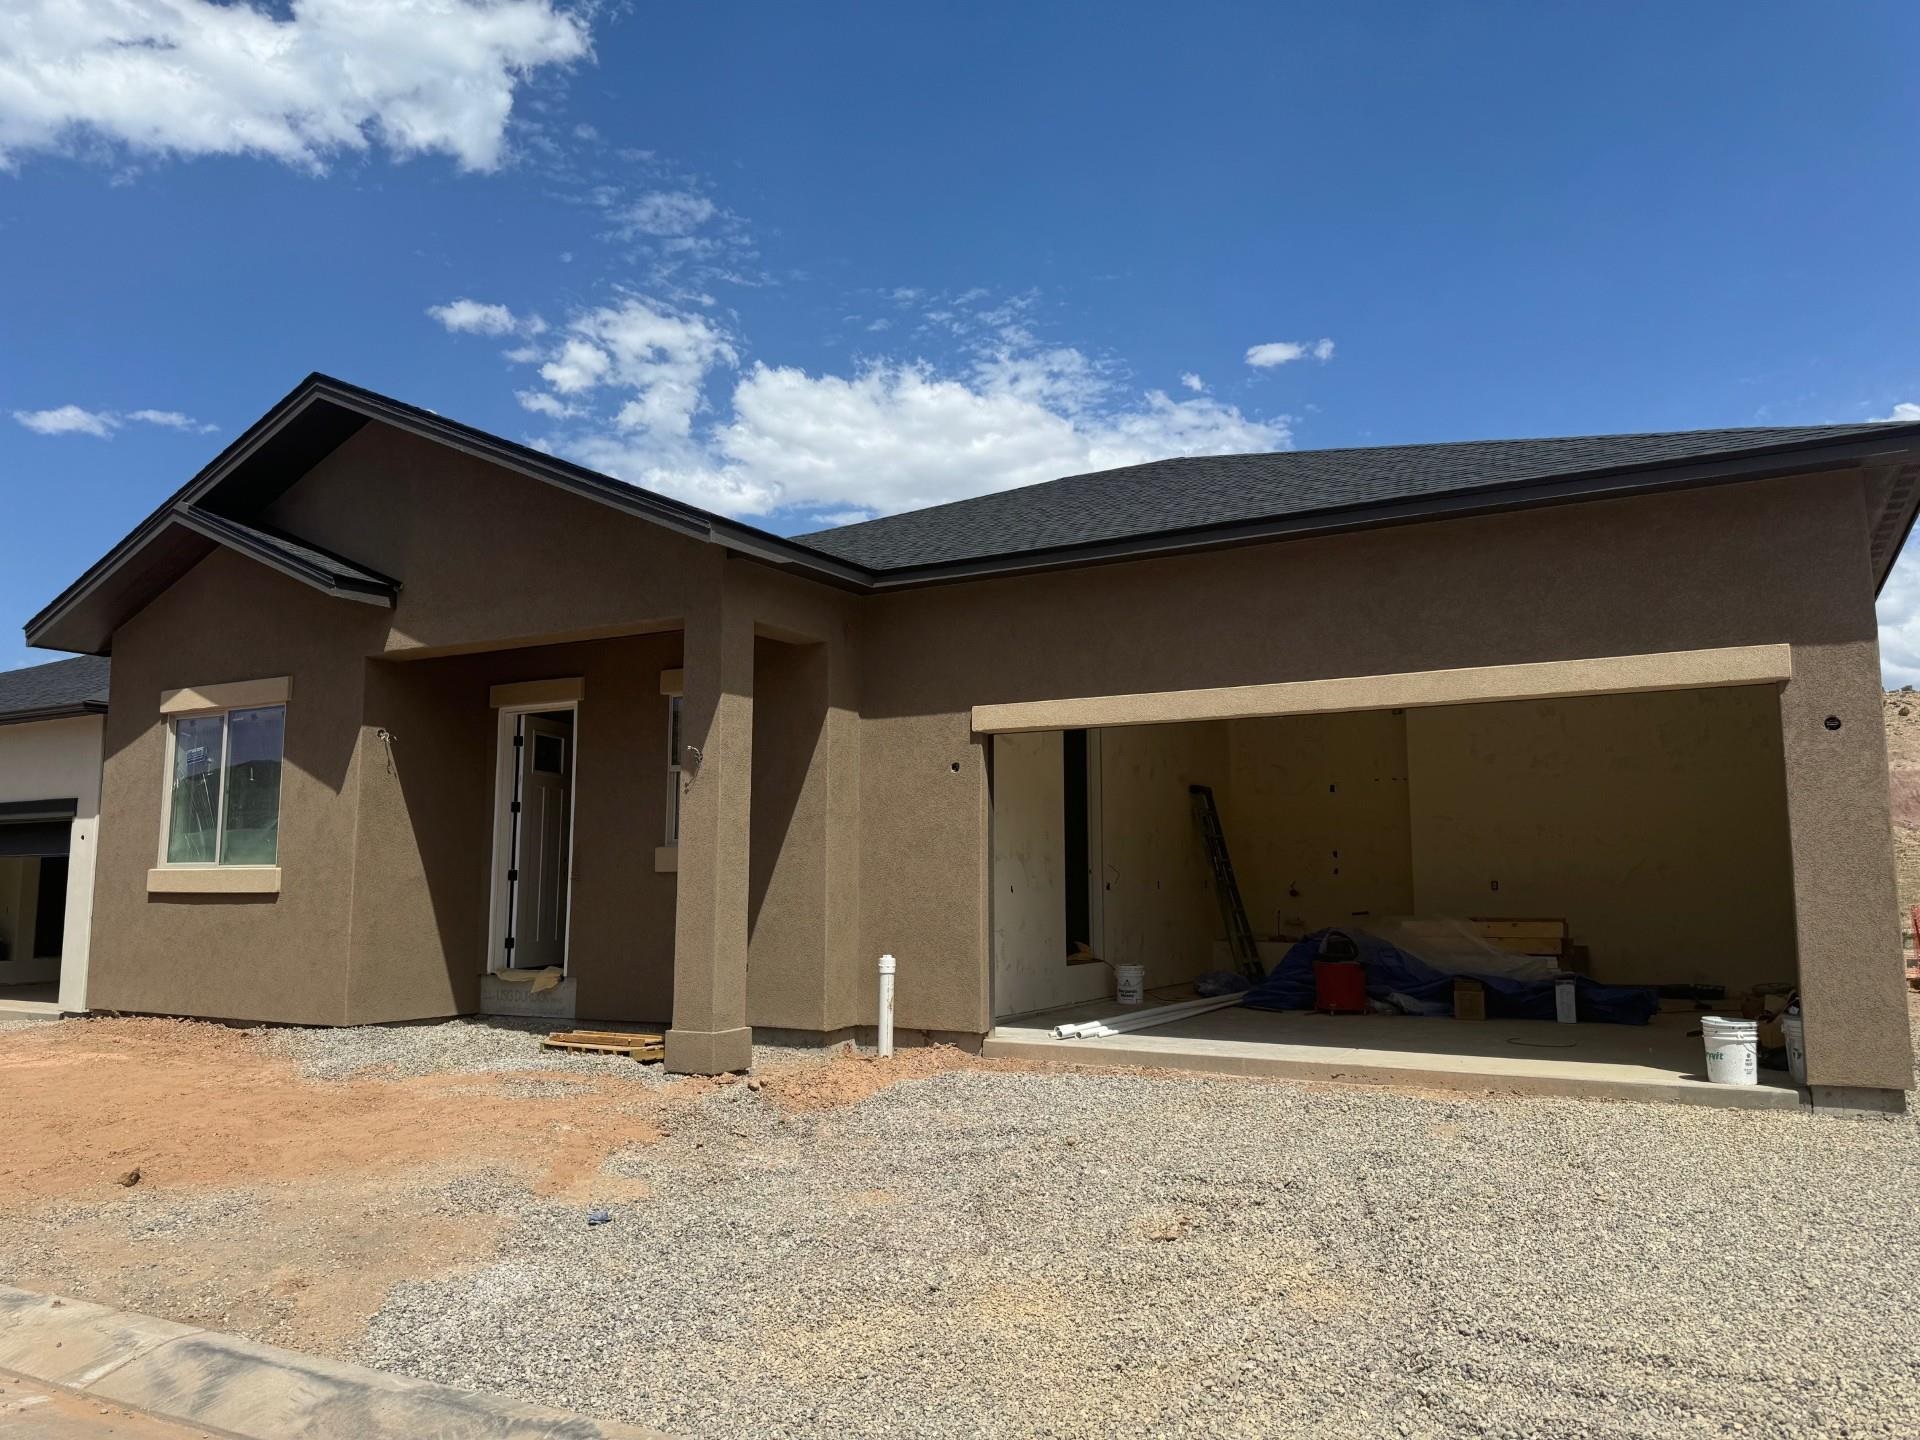 NEXT UP!!! Great views, low maintenance, close to hiking, biking, golf and downtown GJ. Featuring two generously sized bedrooms plus a small study.  Take advantage of the quality of a Conquest Construction build!  Landscaping and fencing included.  Take a look today!